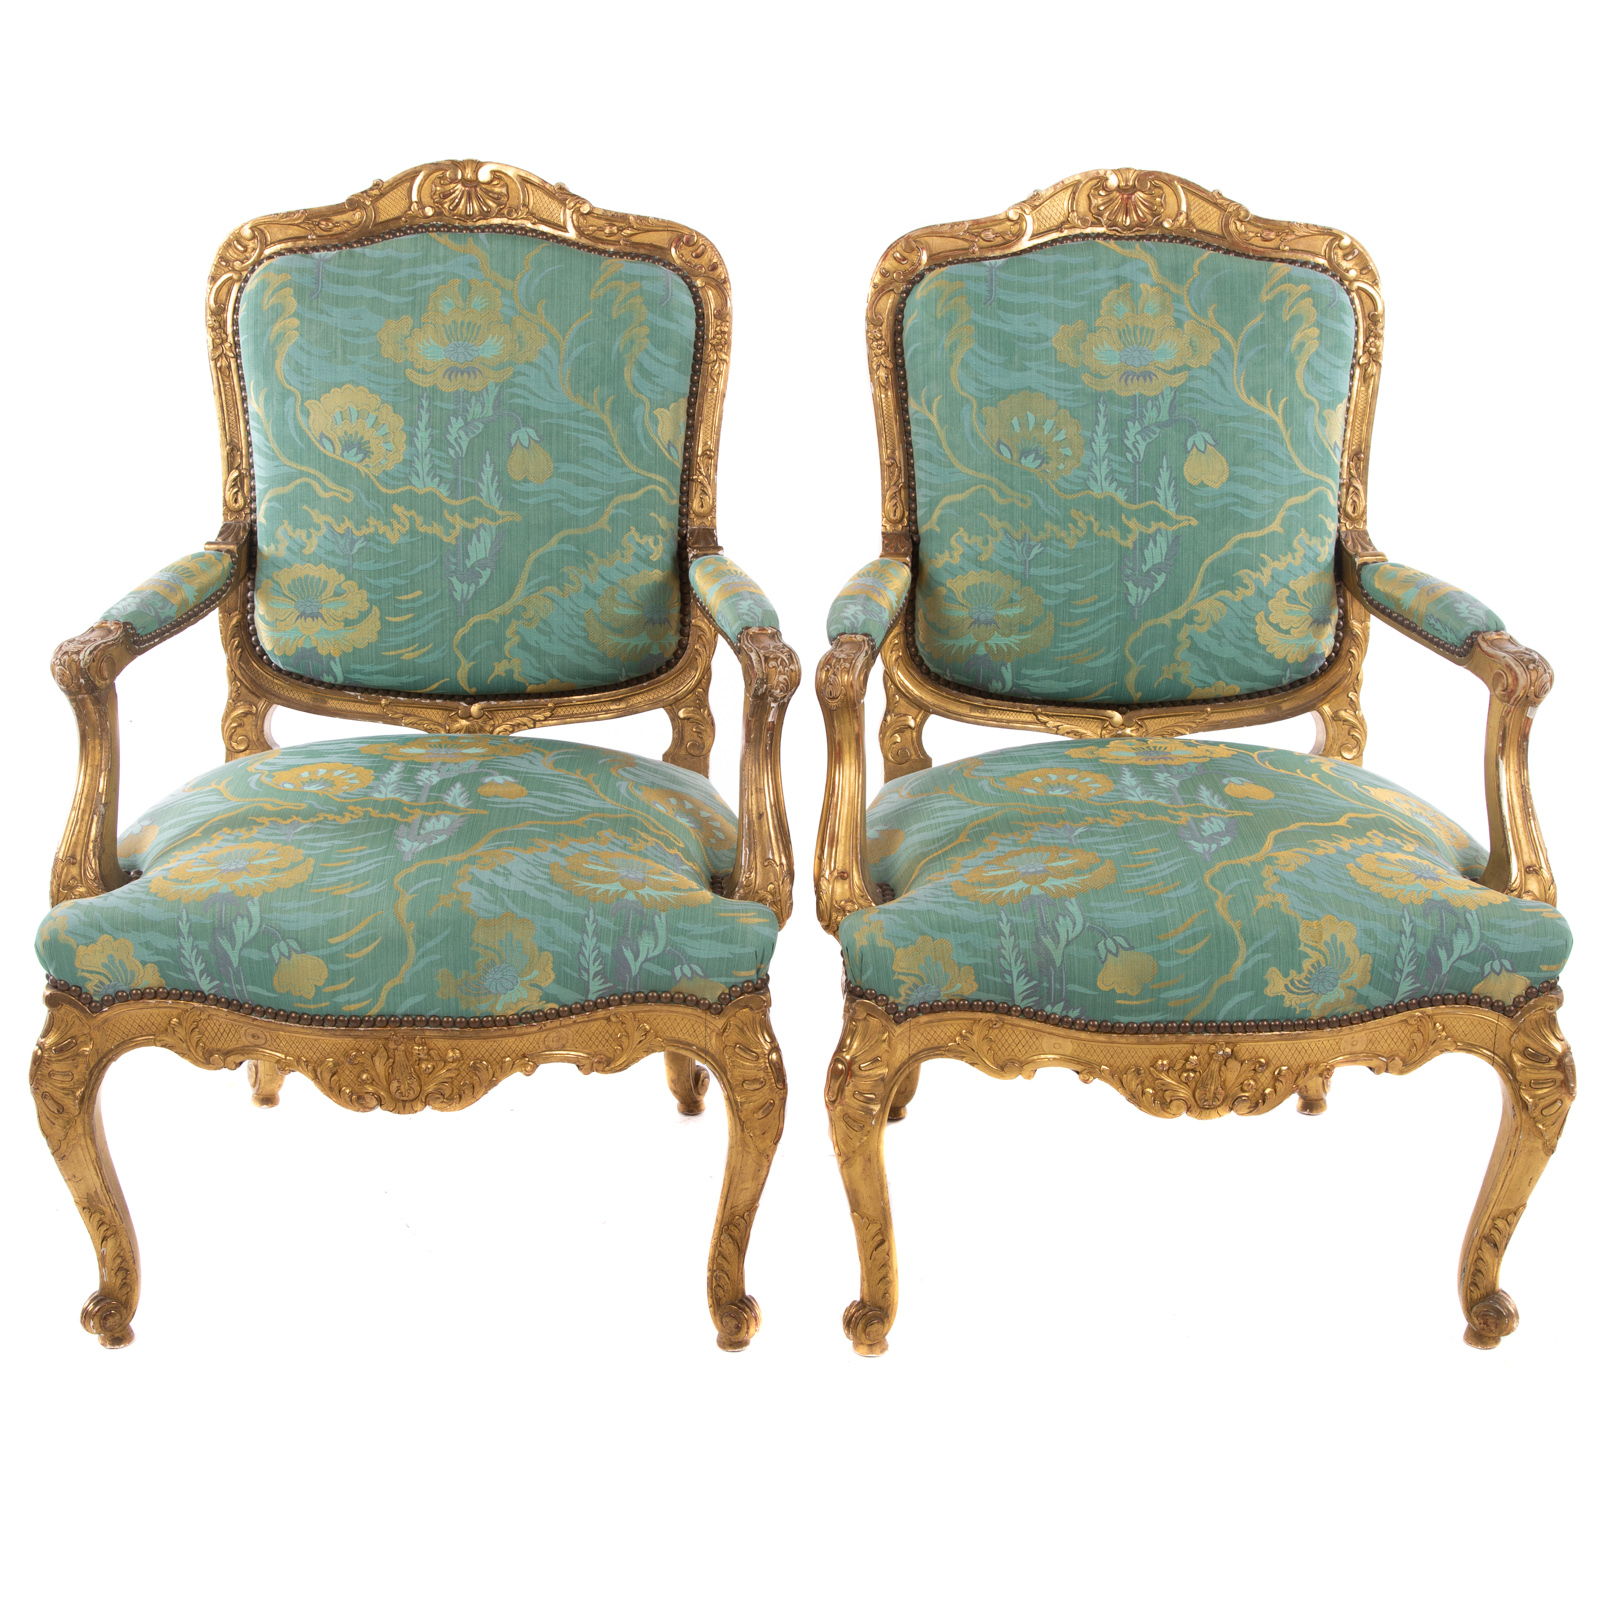 A PAIR OF LOUIS XV STYLE GILTWOOD